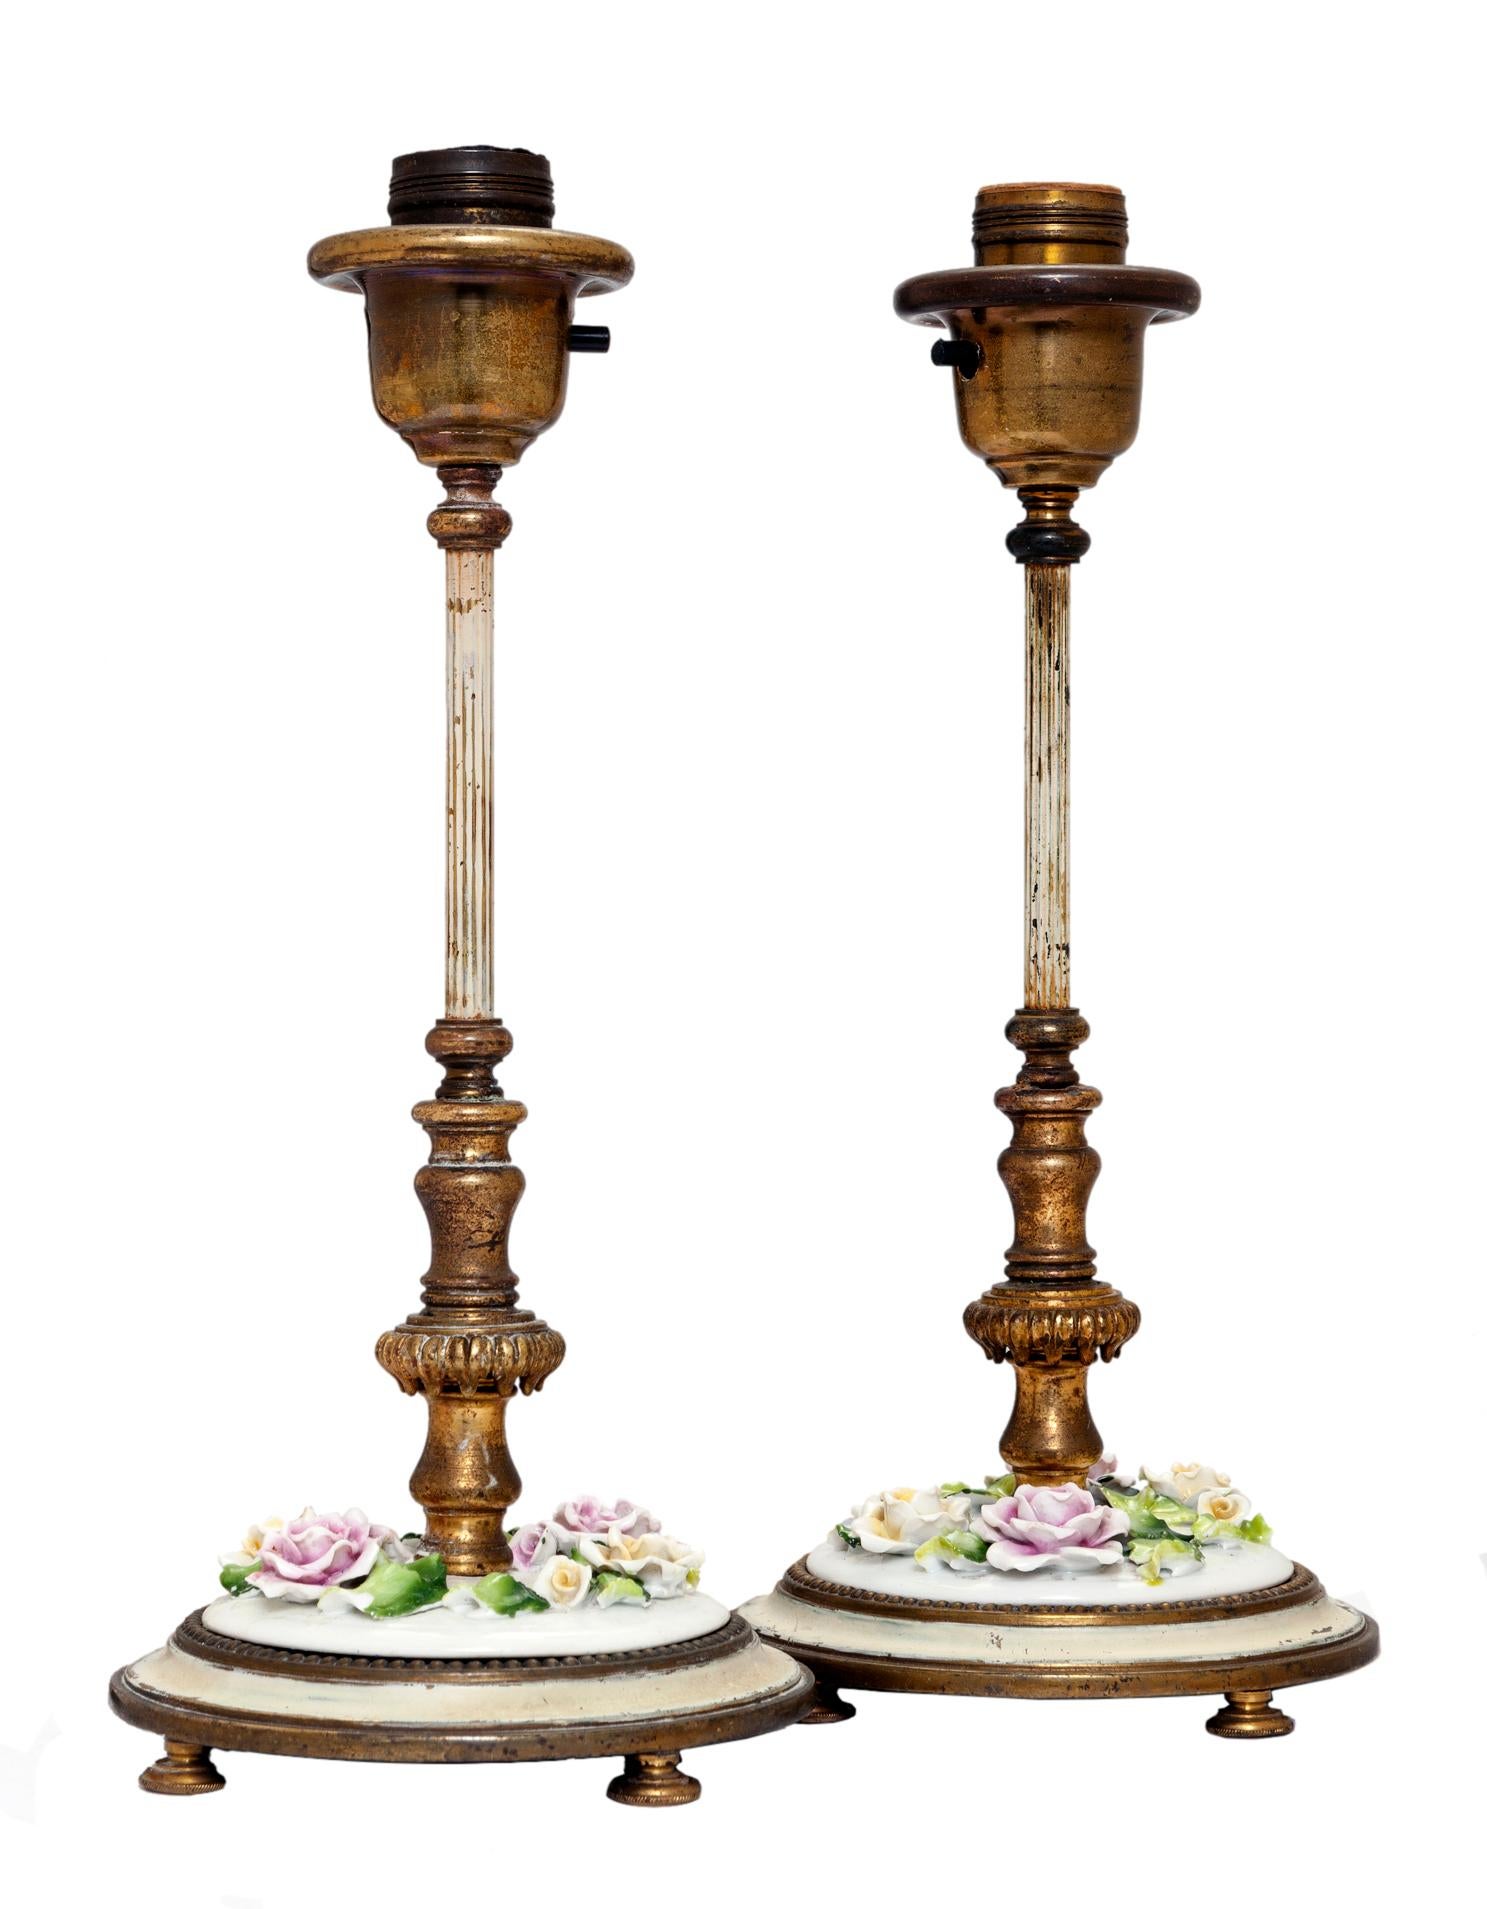 German Footed Candlestick Vanity Lamps with Porcelain Flowers; a Pair In Good Condition For Sale In Malibu, CA